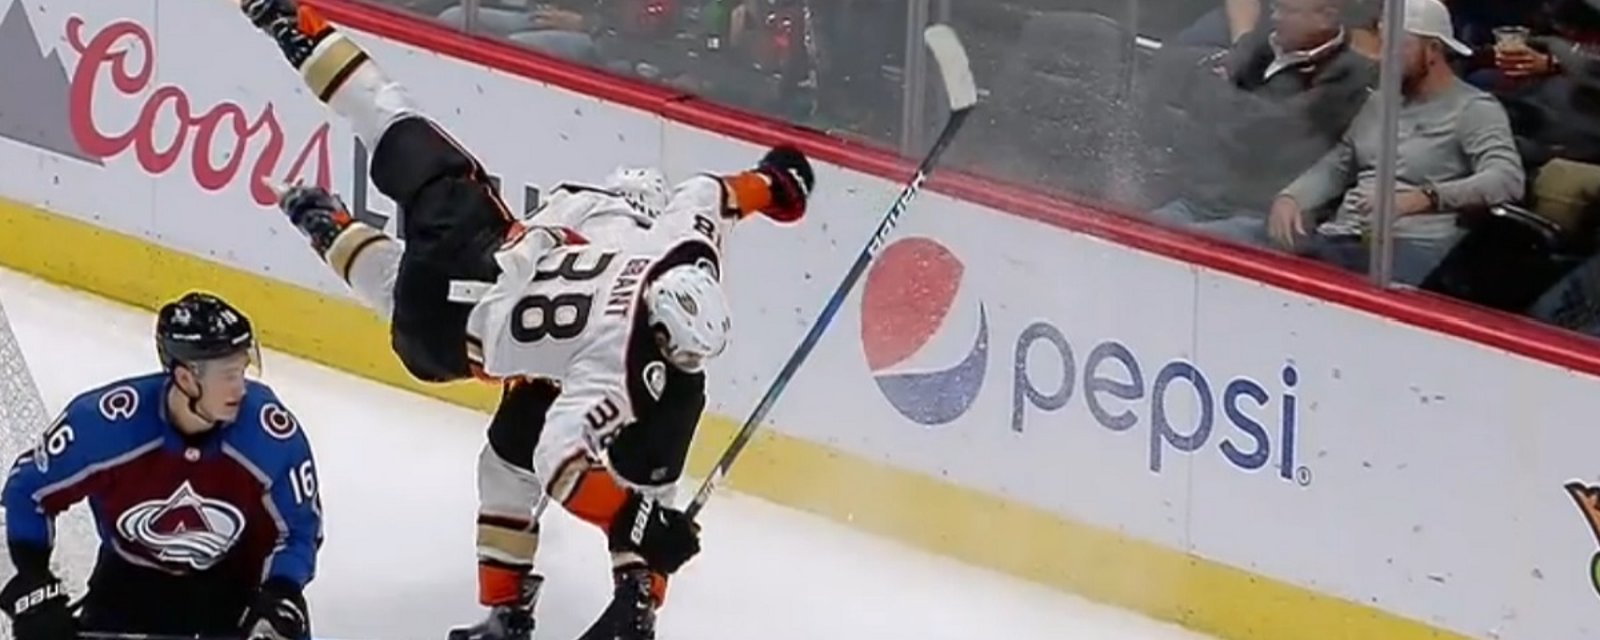 Derek Grant gets destroyed by a huge hit from his own teammate.